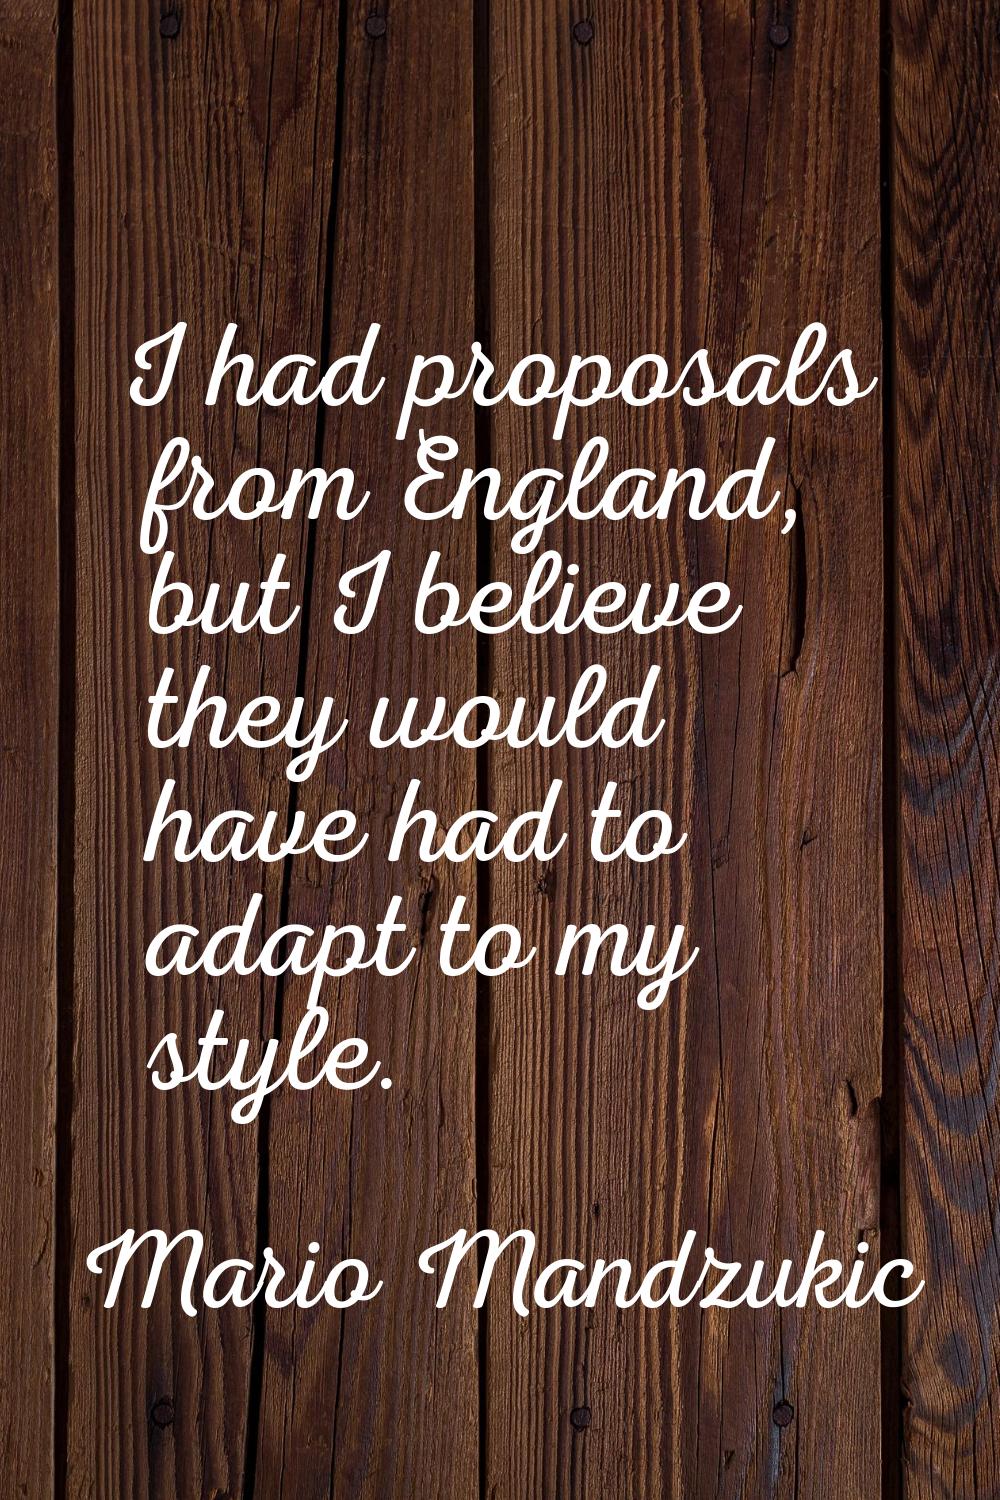 I had proposals from England, but I believe they would have had to adapt to my style.